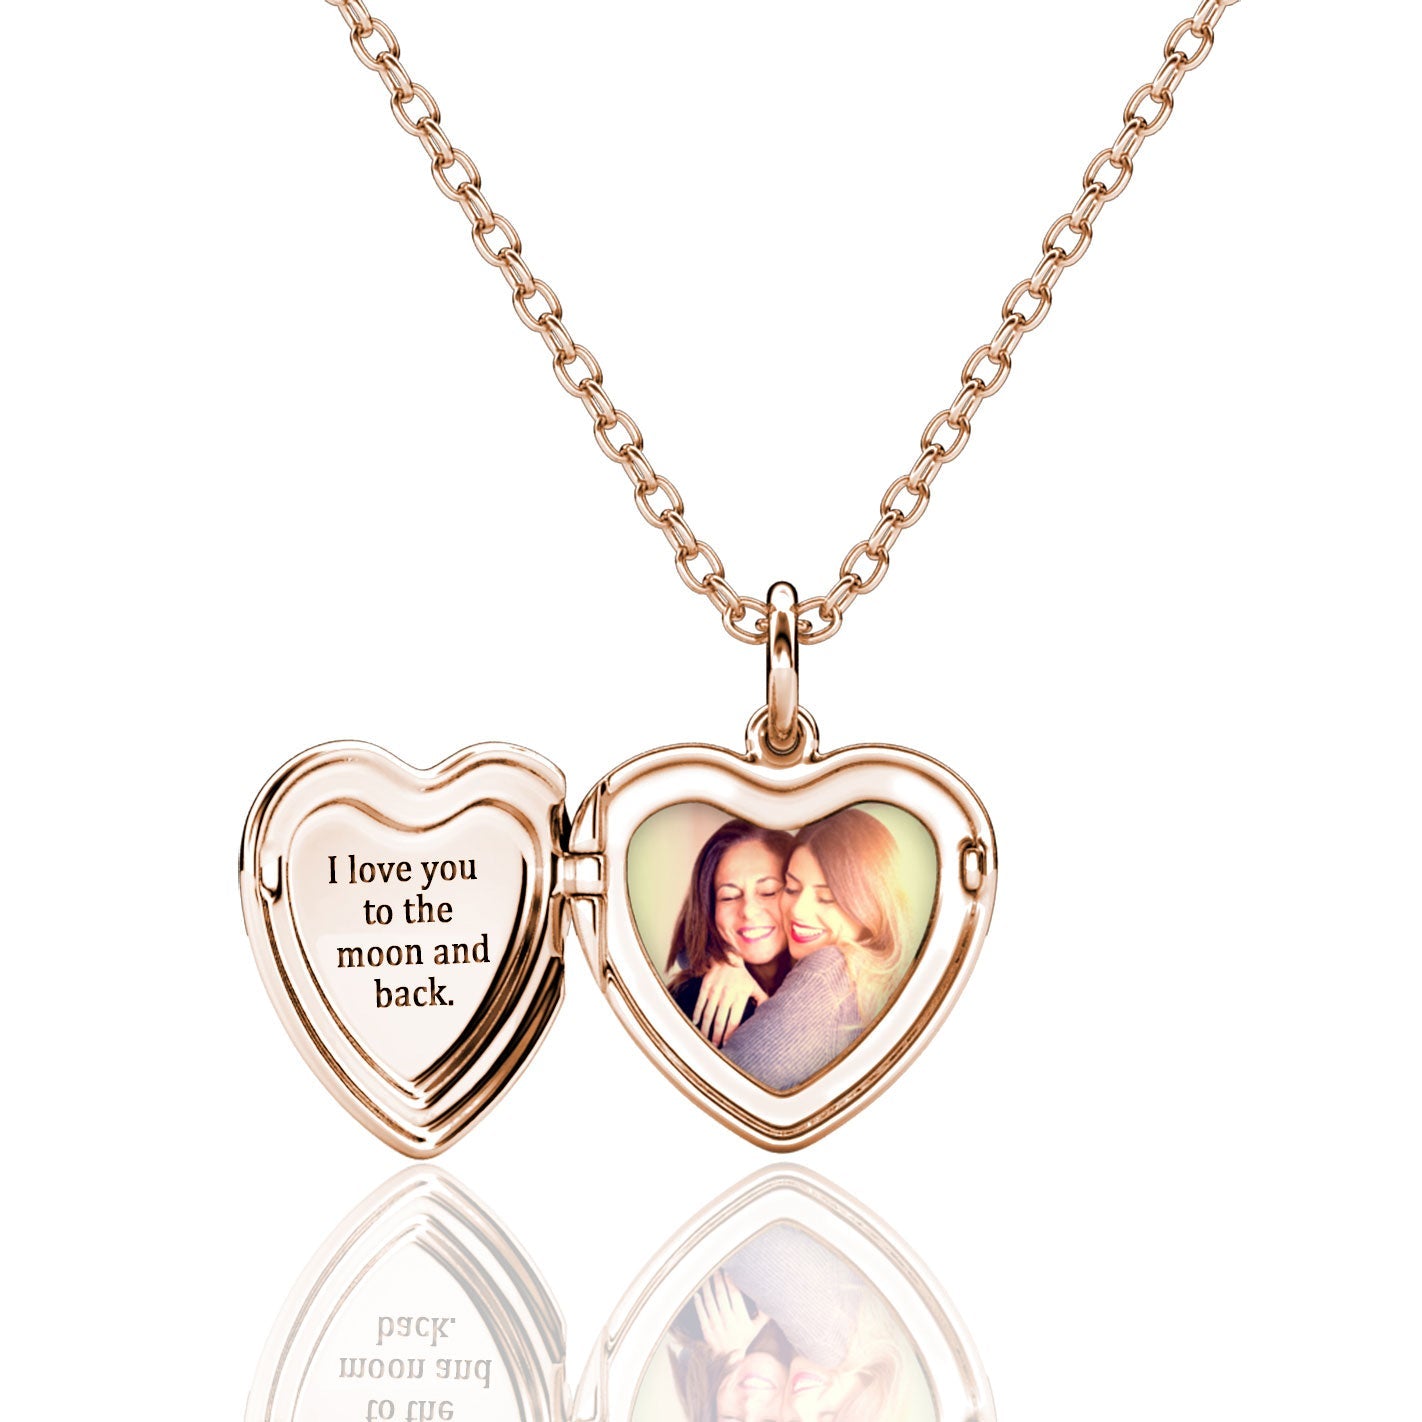 Gold Locket Necklace That Holds Pictures Photo Locket Necklace for Women  Flower Locket Necklaces for Girls Round Pendant Necklace with Picture  Inside